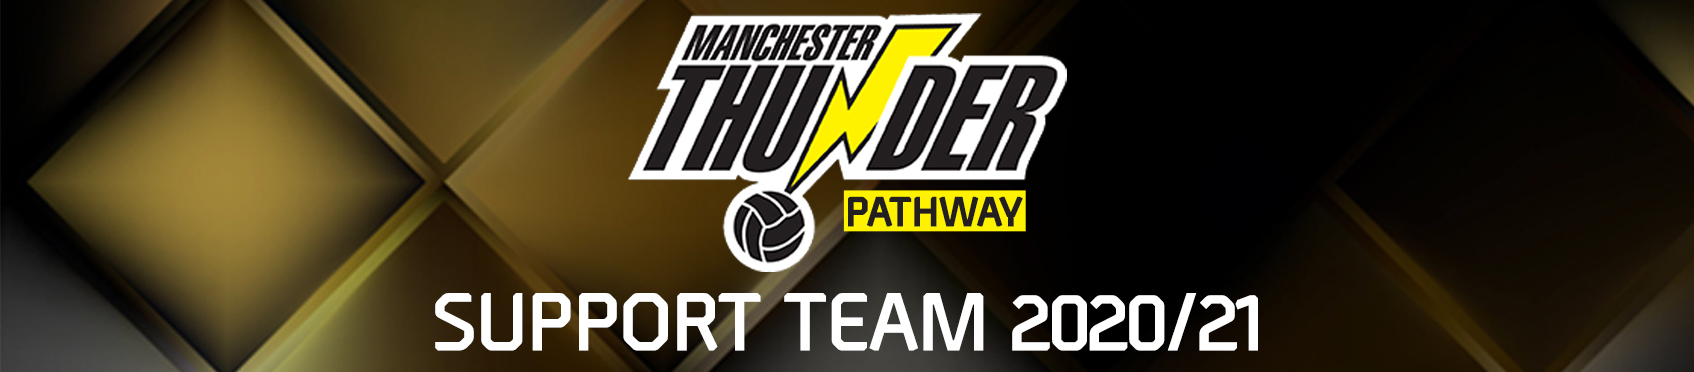 Thunder Pathway Support Team